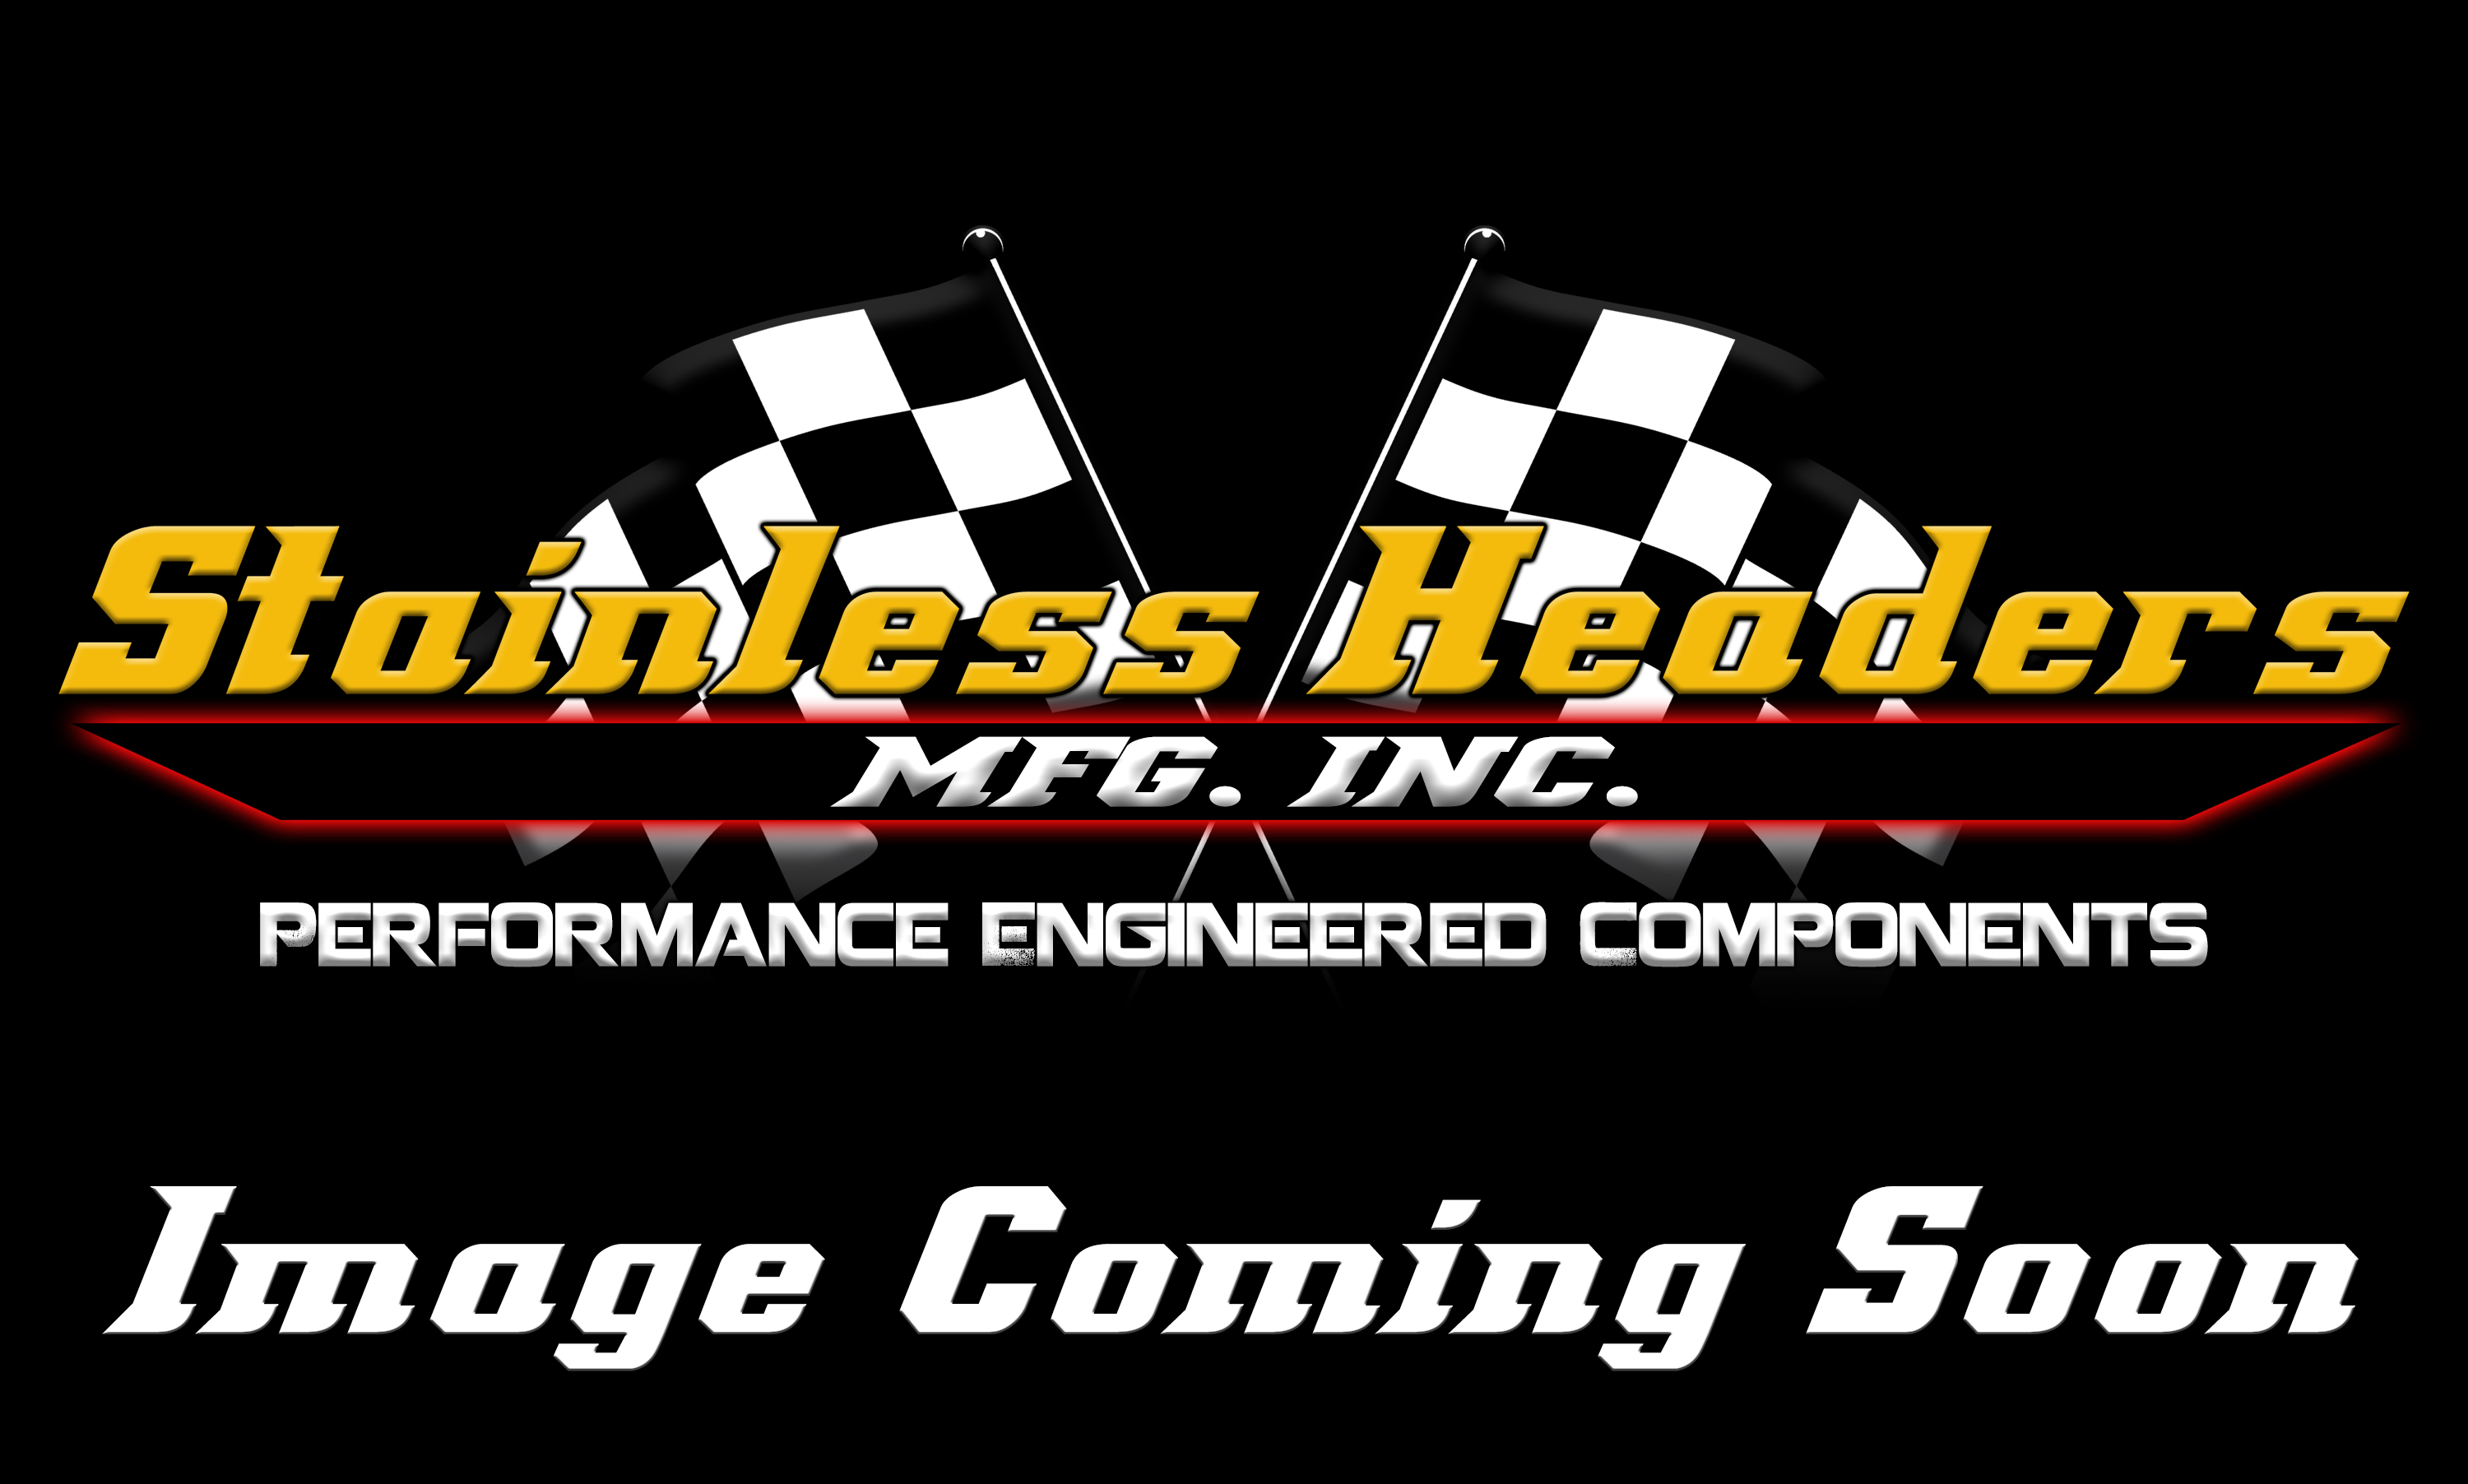 Stainless Headers - 1 5/8" Primary 4 into 1 Performance Merge Collector-16ga 304ss - Image 1